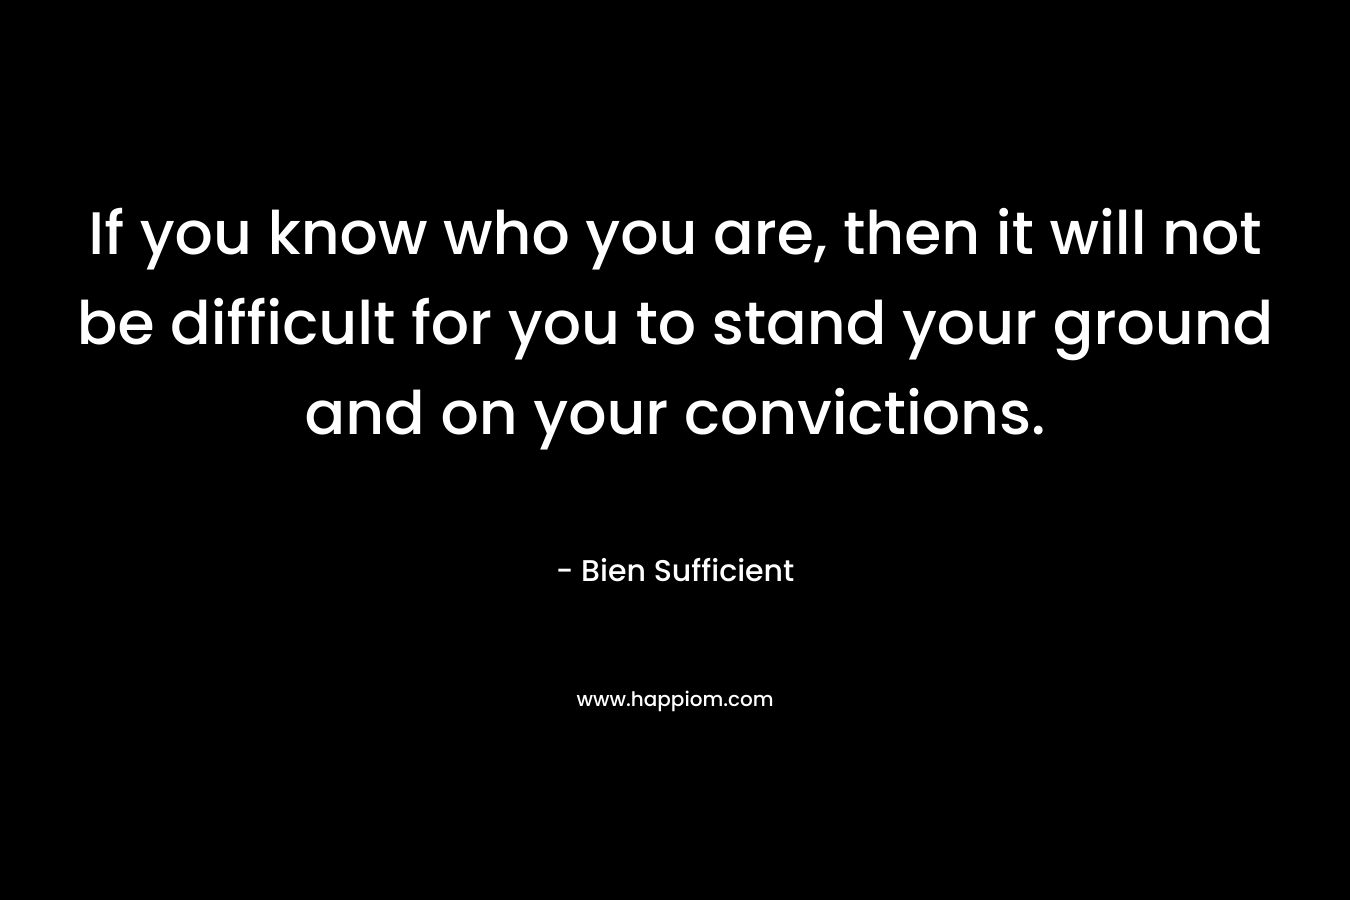 If you know who you are, then it will not be difficult for you to stand your ground and on your convictions. – Bien Sufficient